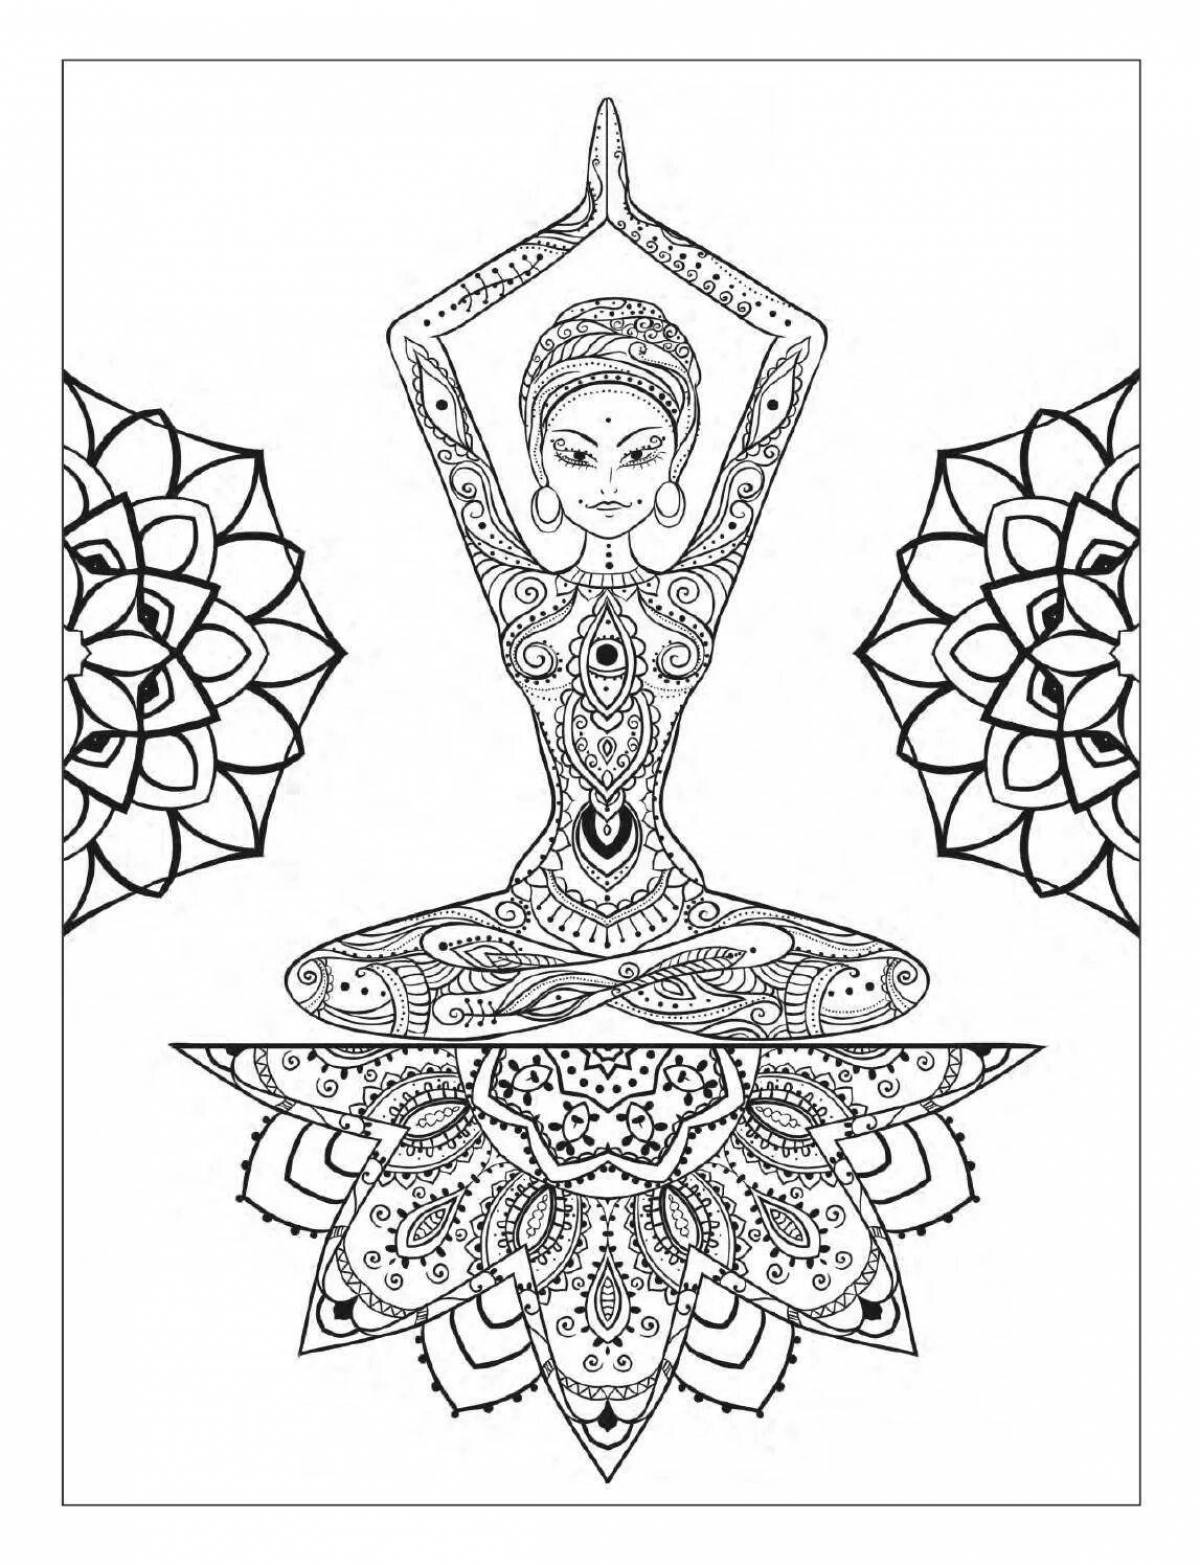 Bright coloring meditation page